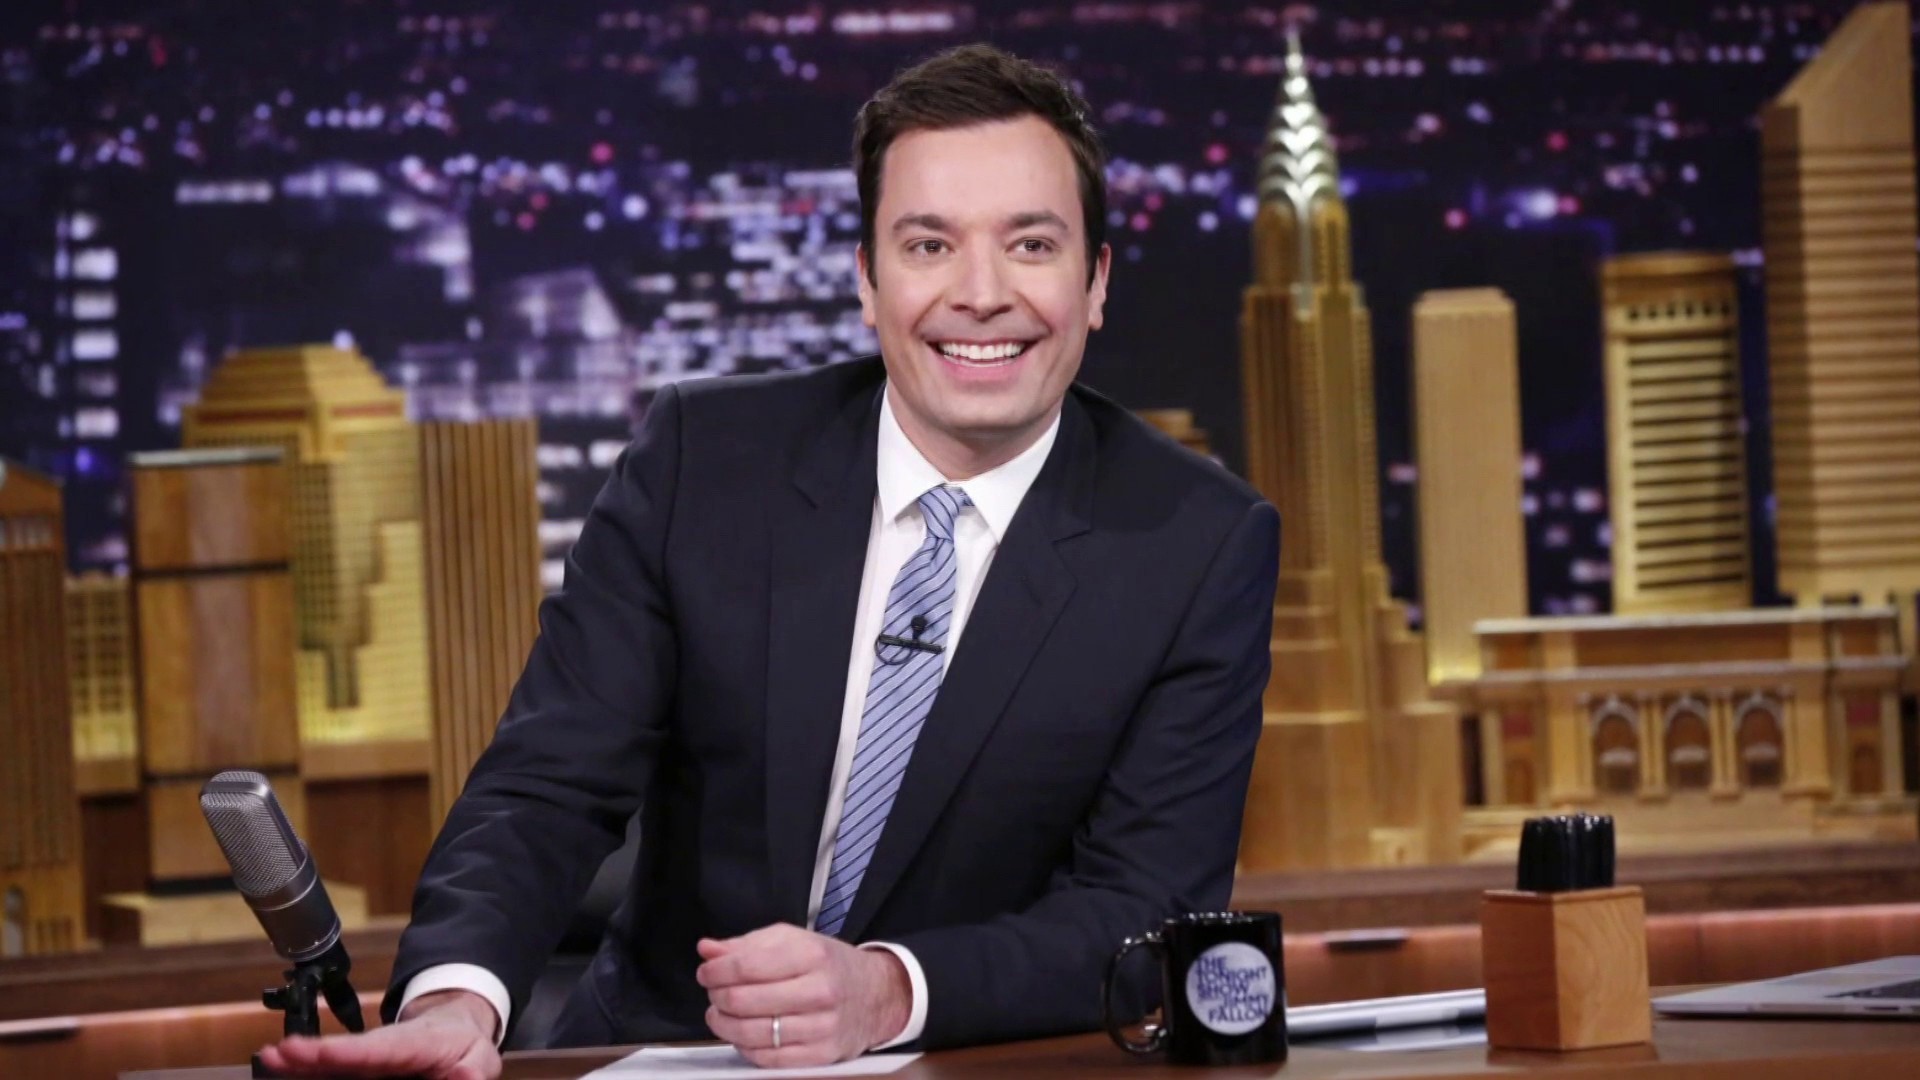 Jimmy Fallon to celebrate 10 years on 'Tonight Show' with special